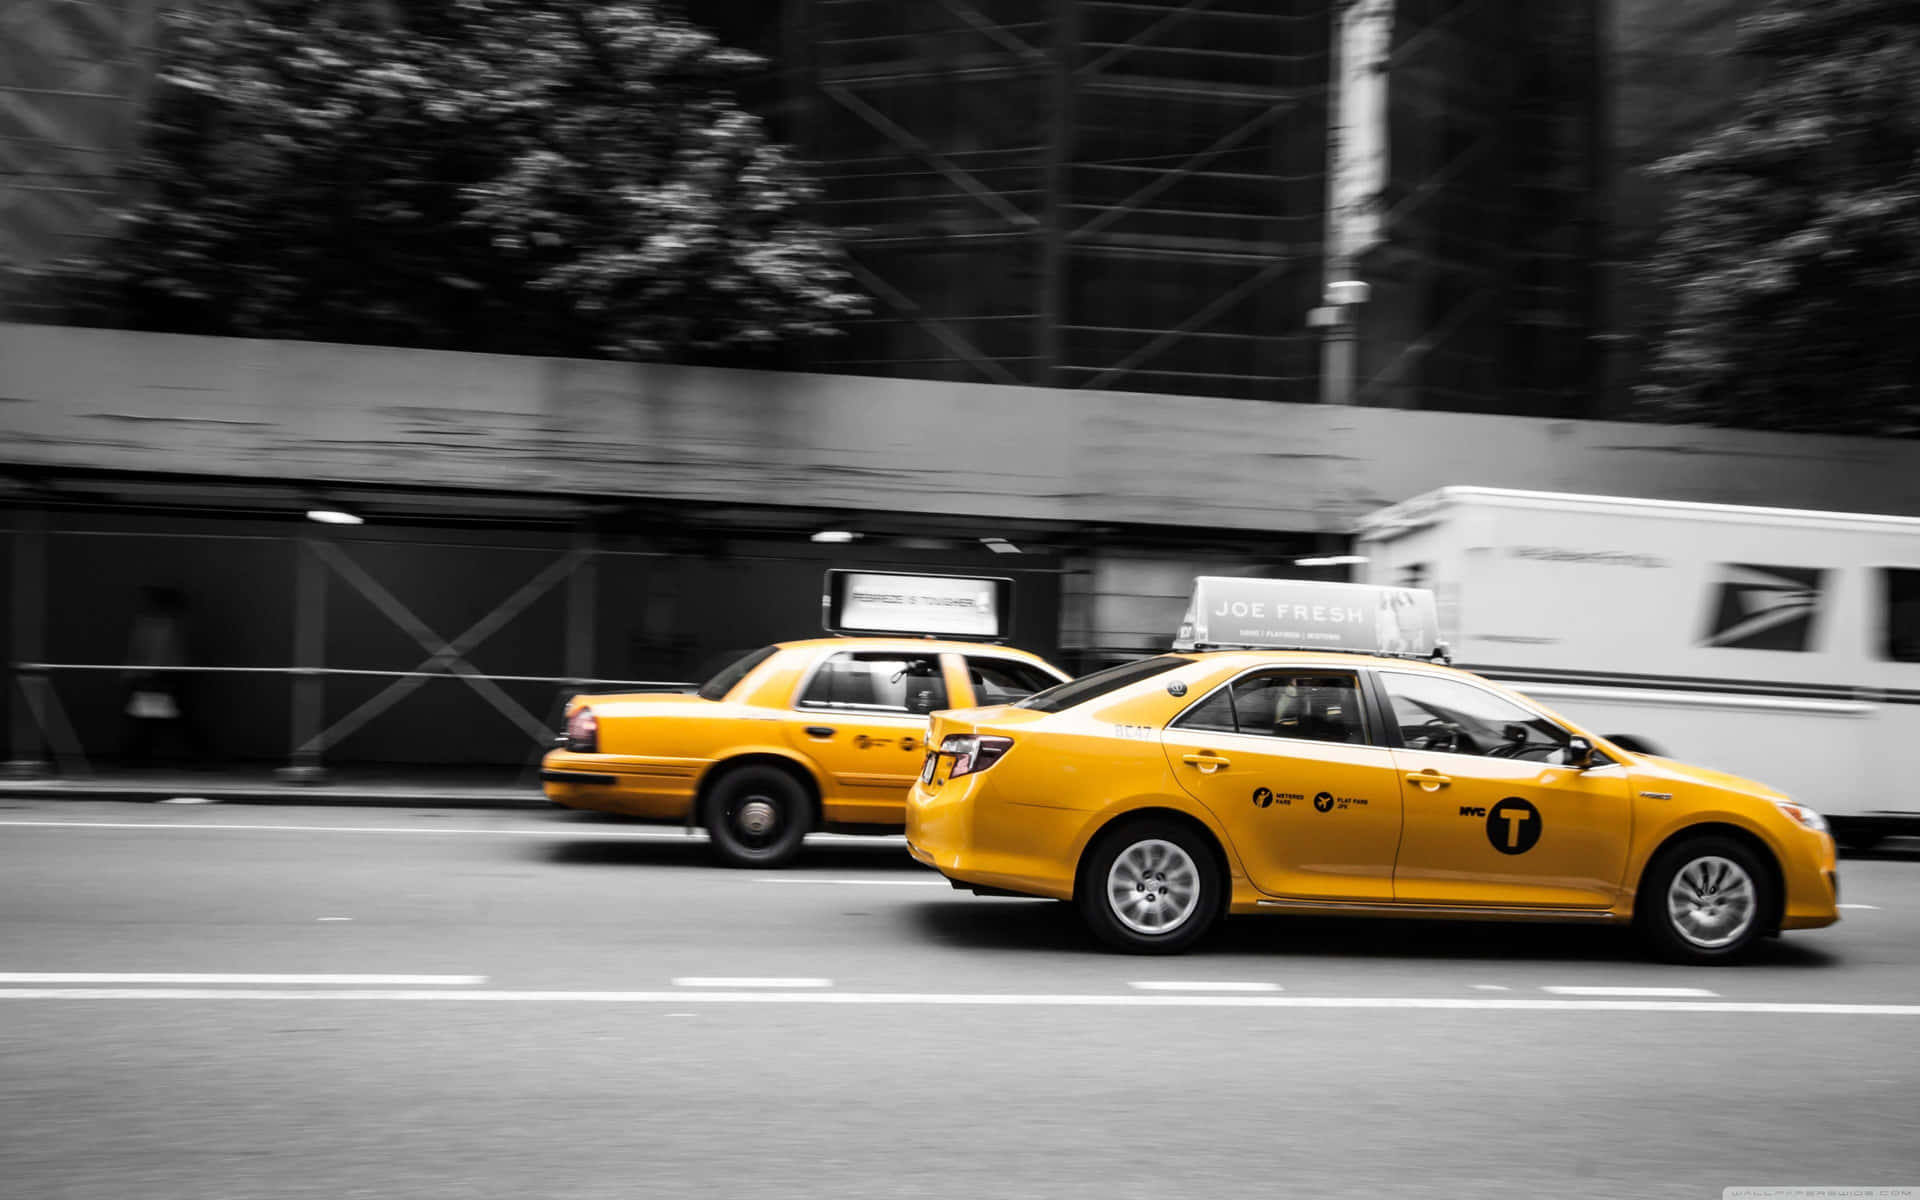 Yellow Cab Parked in City Street Wallpaper